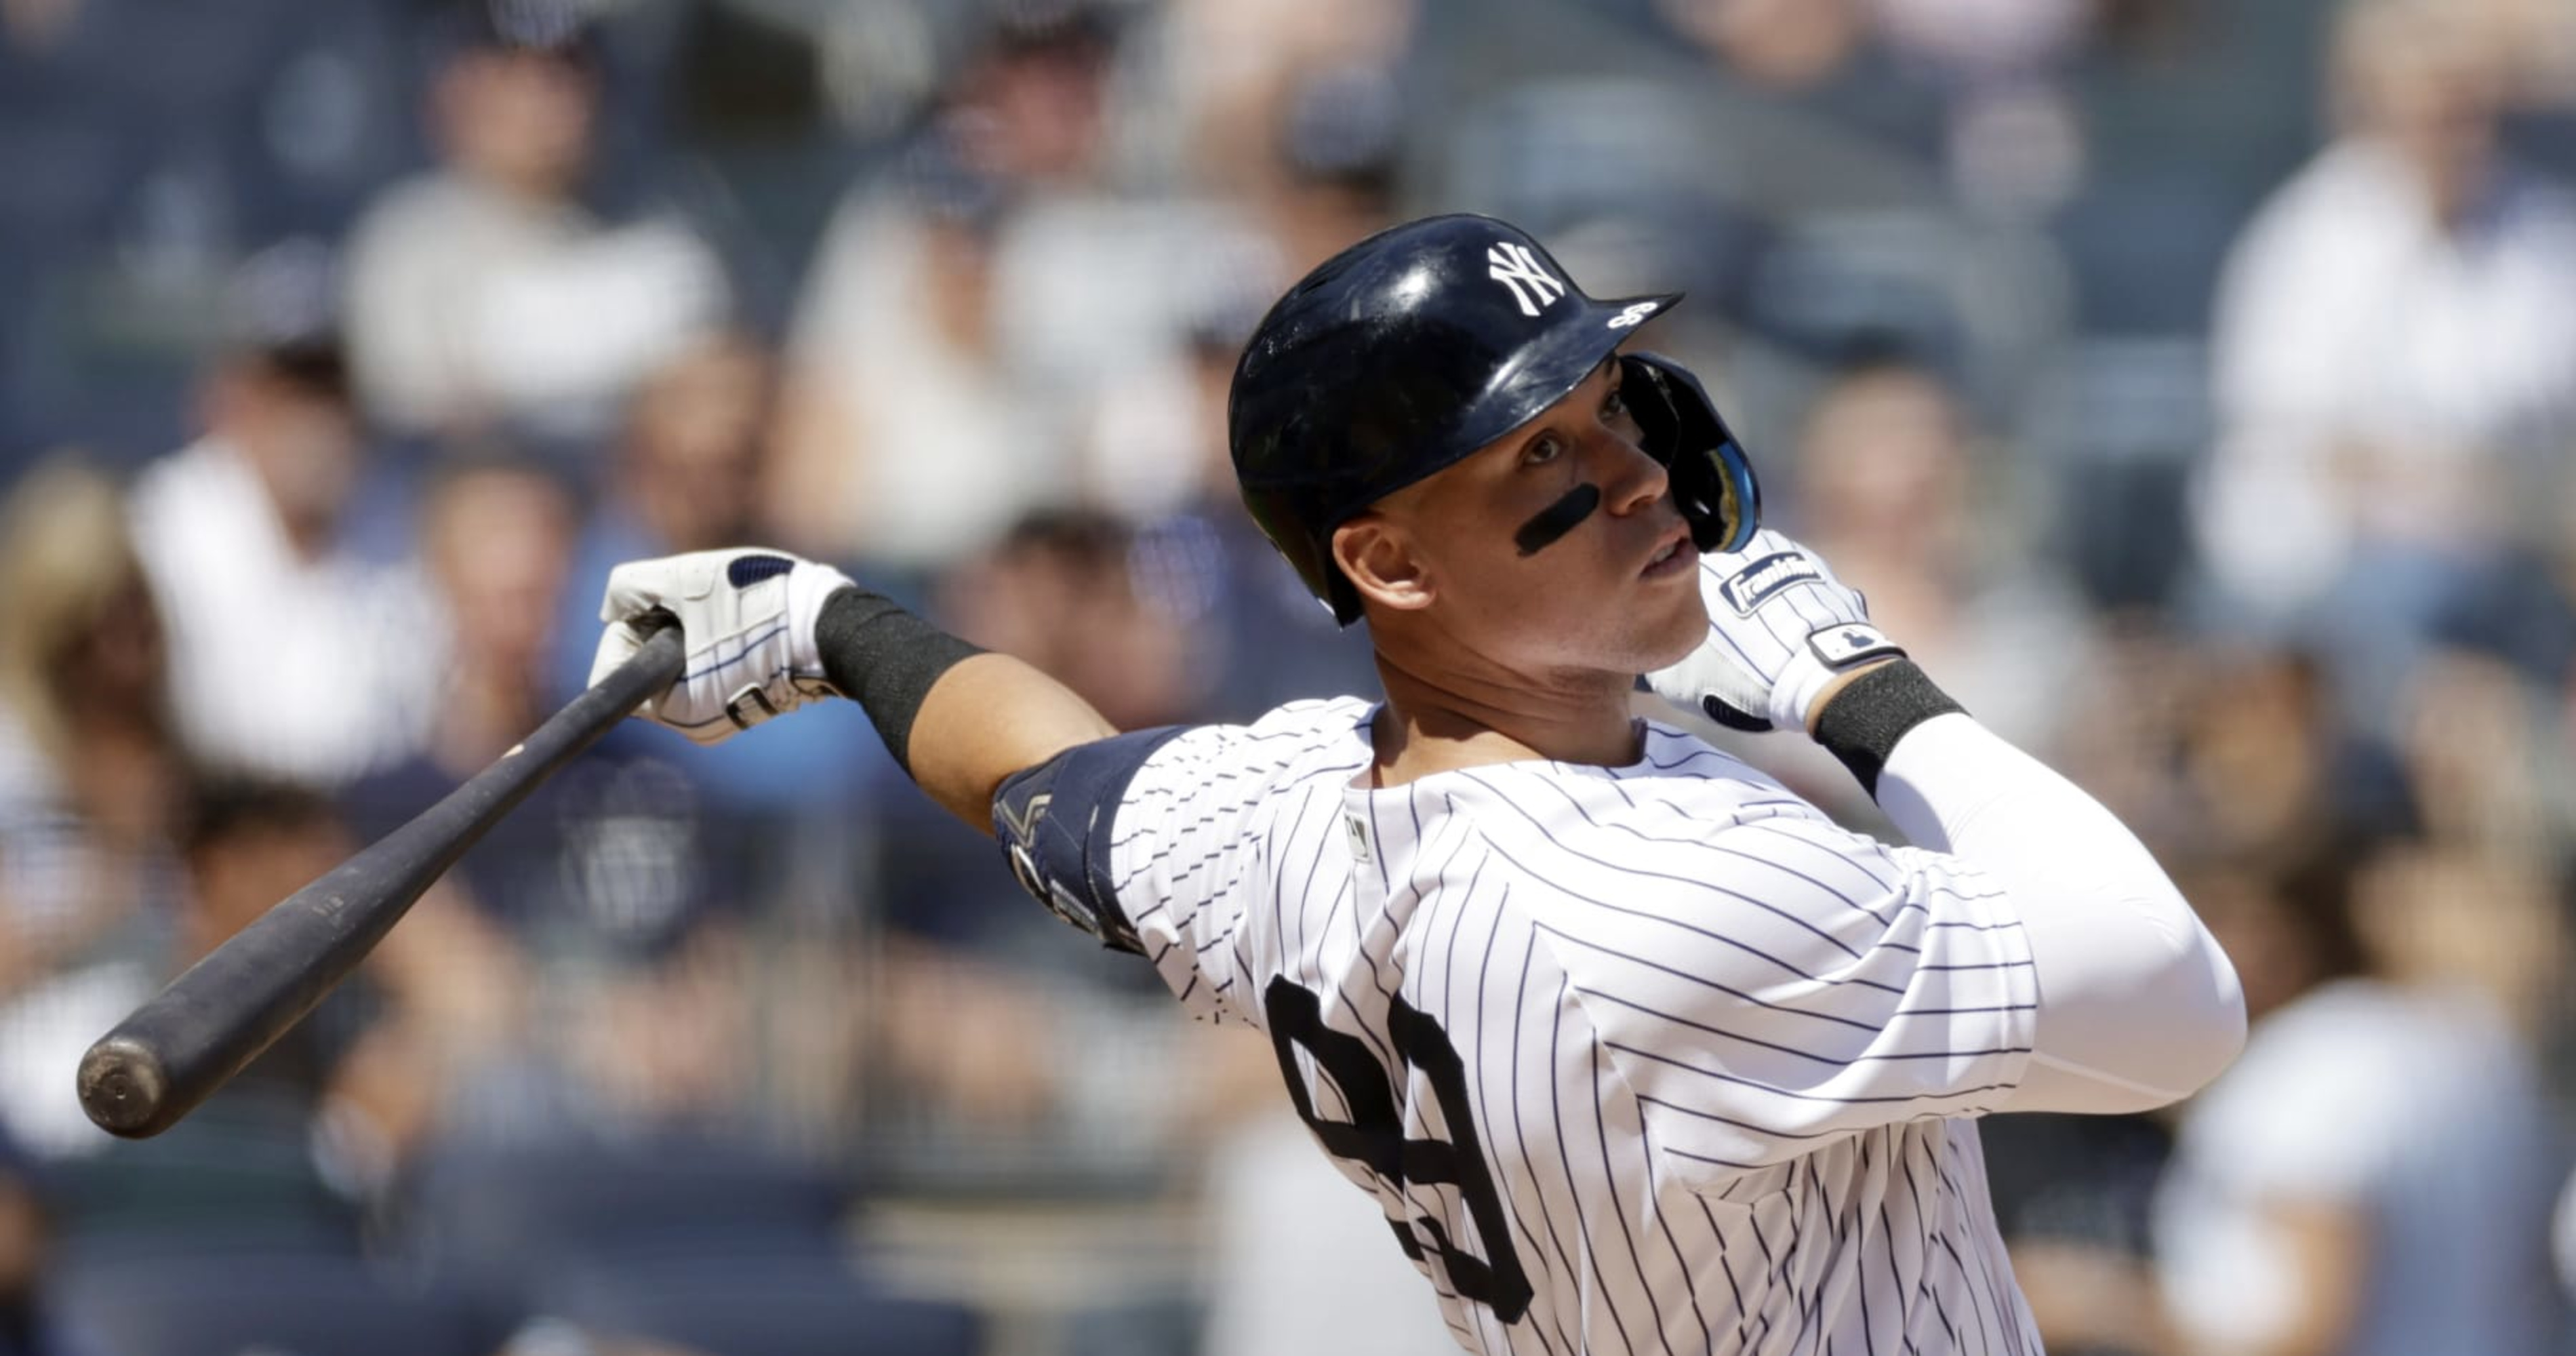 Aaron Judge Is Chasing Some Historic Home Run Totals